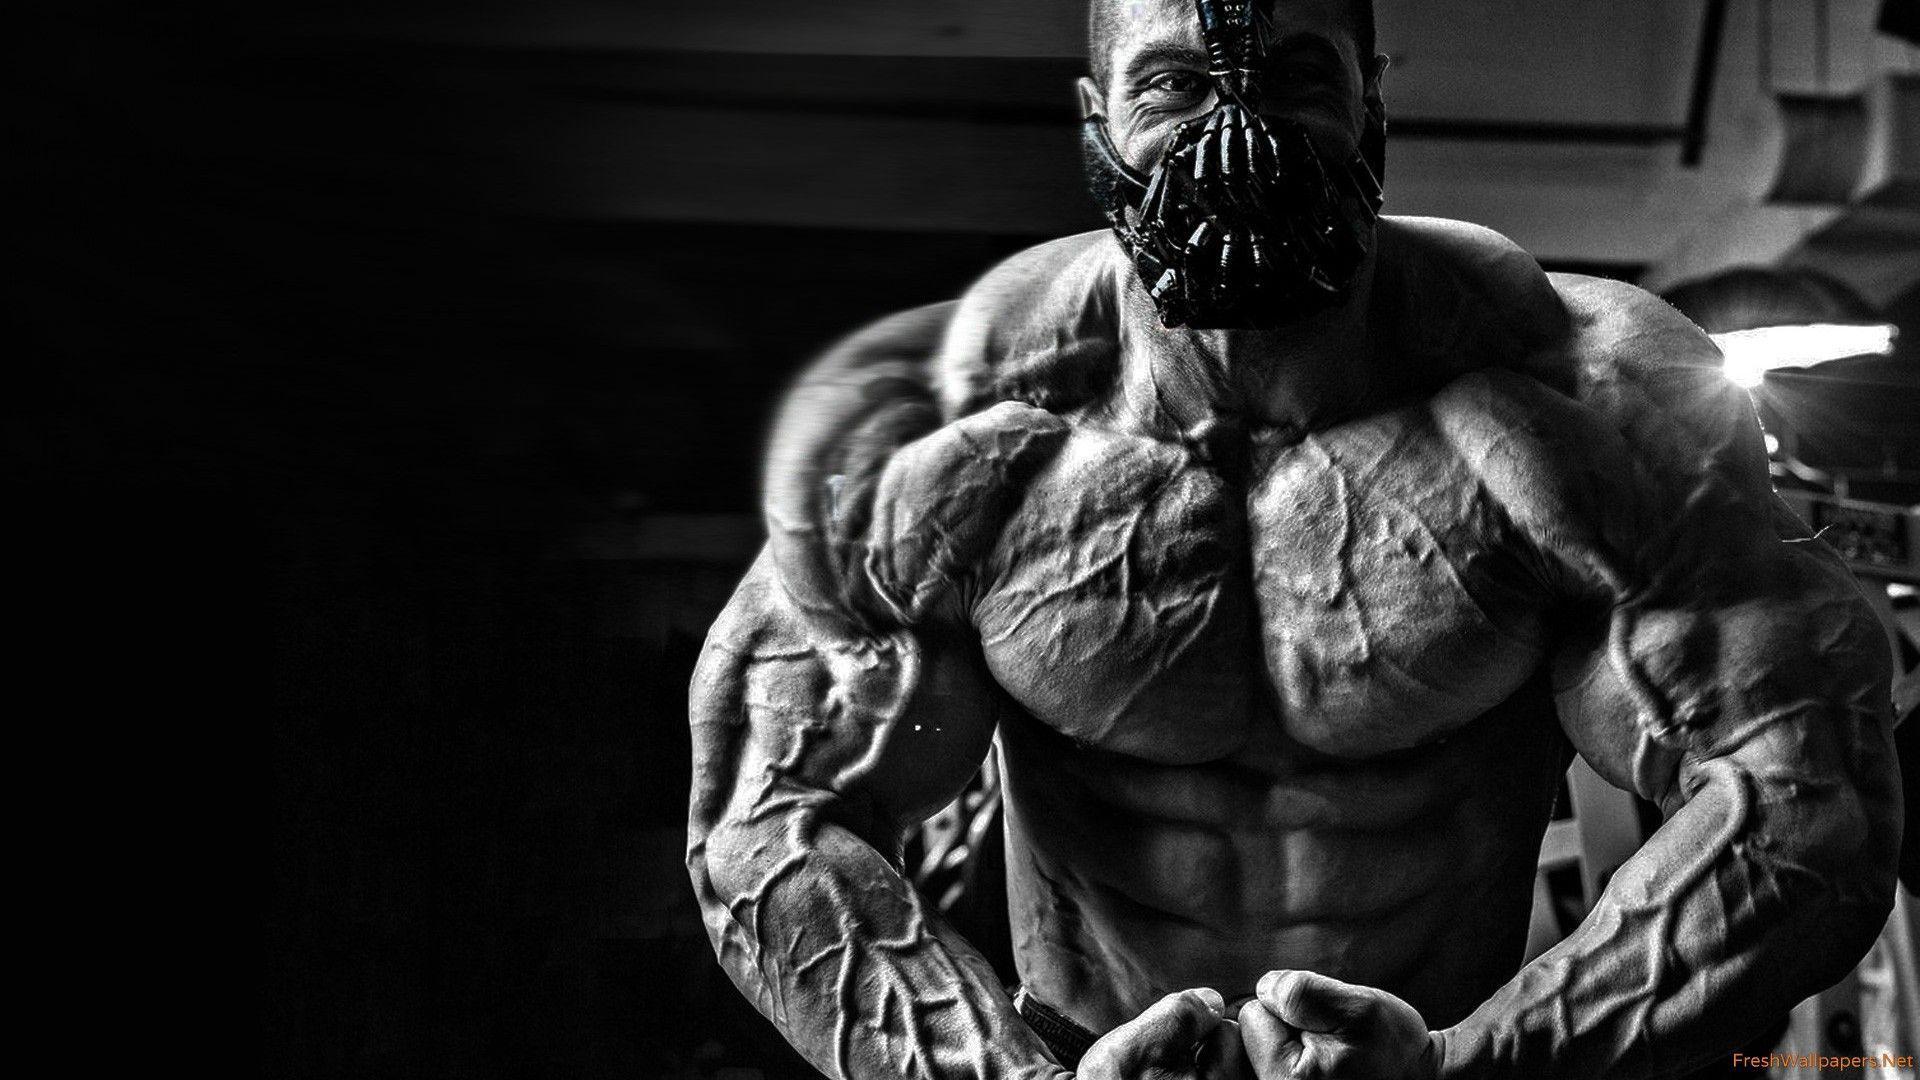 Bane HD Wallpaper and Image download for free